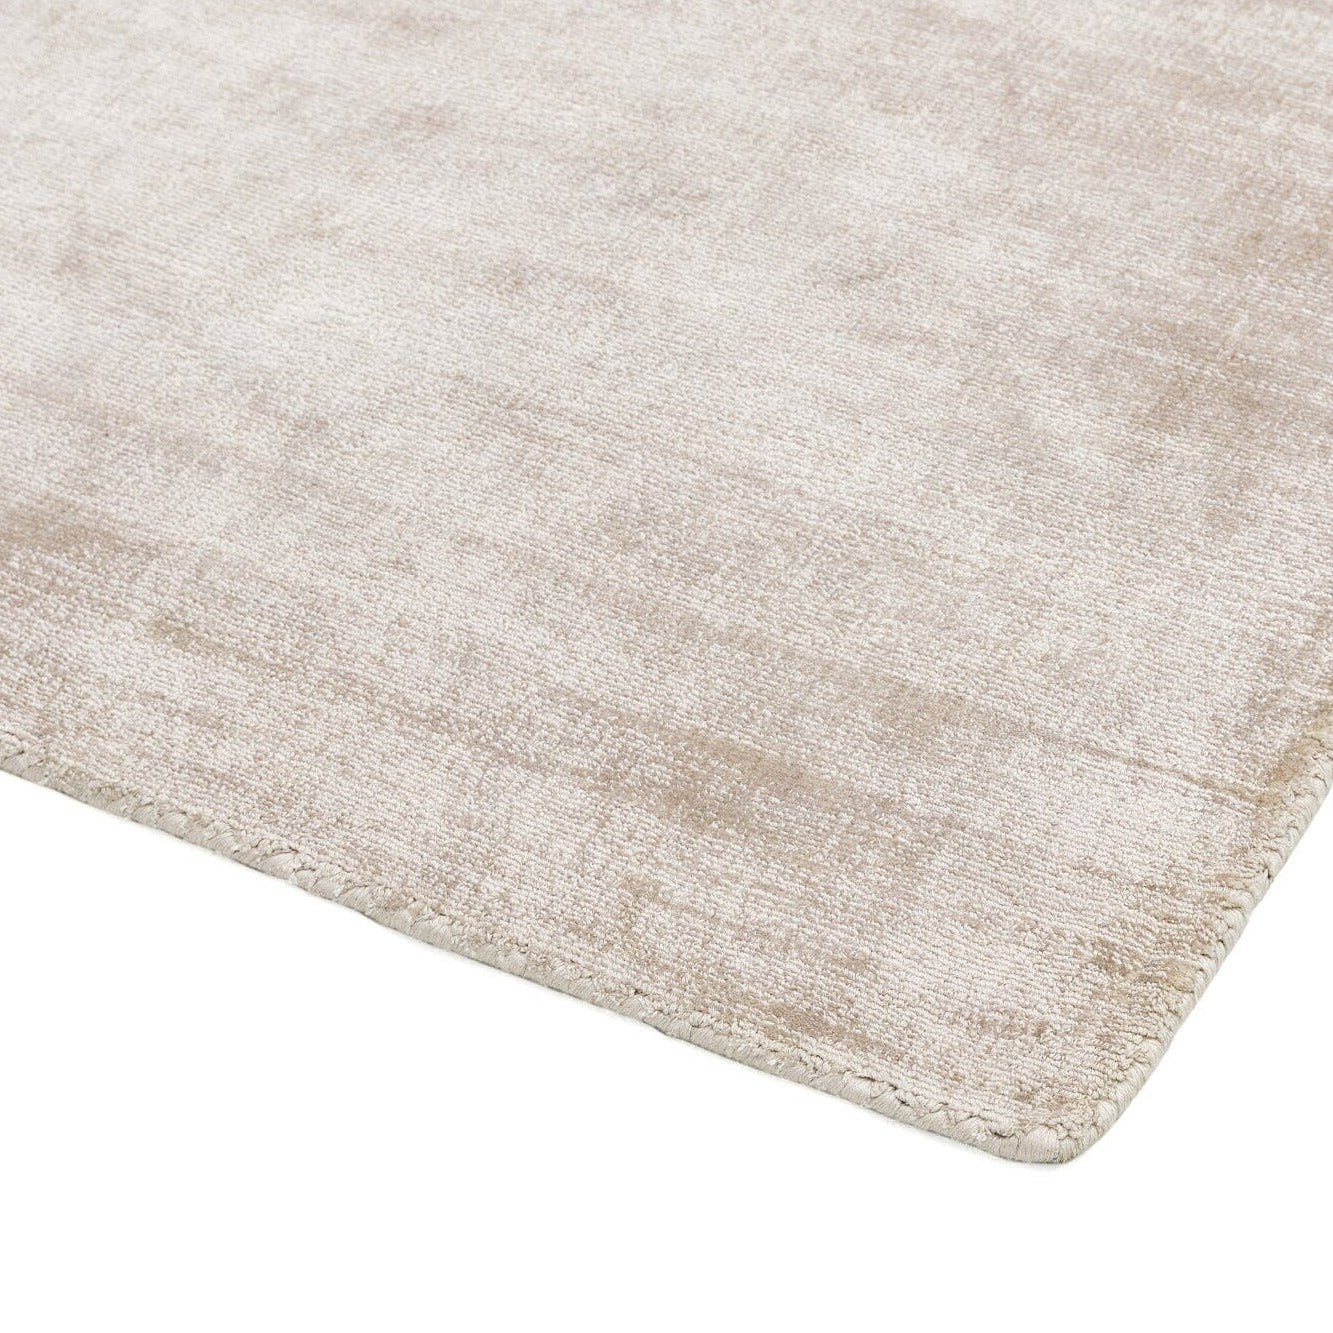  Asiatic Carpets-Asiatic Carpets Blade Hand Woven Rug Putty - 160 x 230cm-Beige, Natural 789 